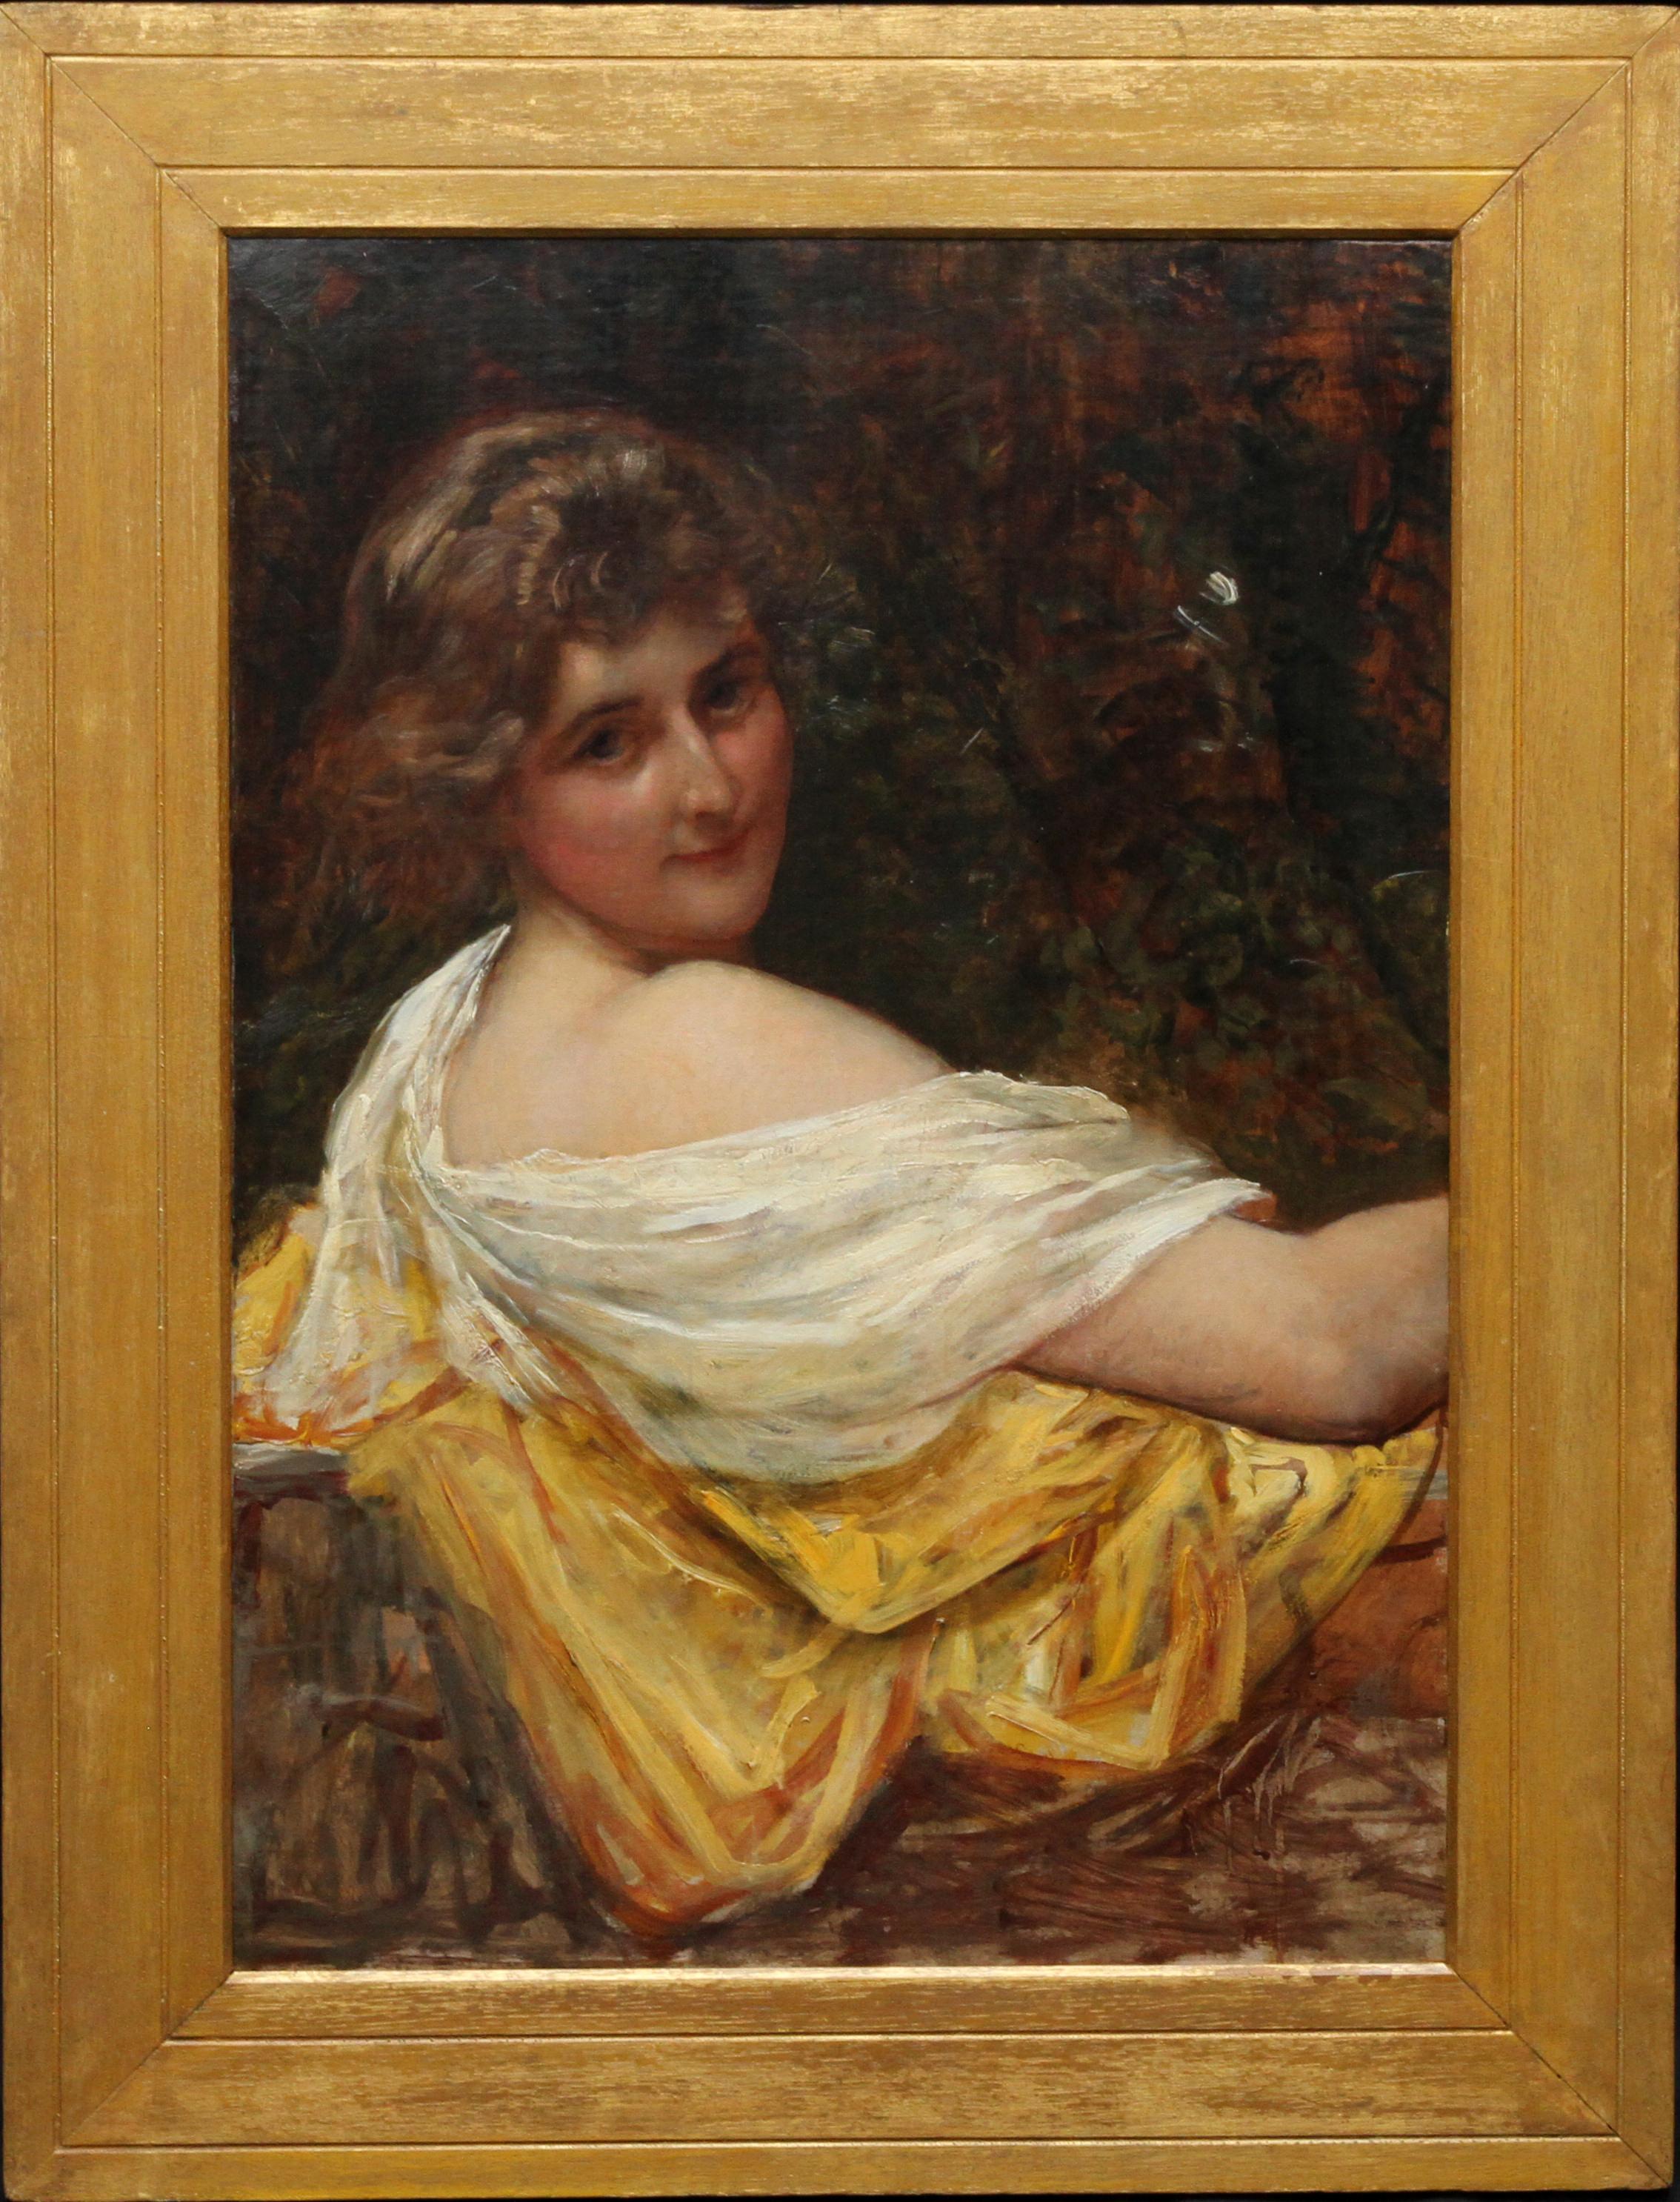 Sir William Blake Richmond Portrait Painting - Portrait of a Young Lady in a Yellow Dress - British Victorian art oil painting 